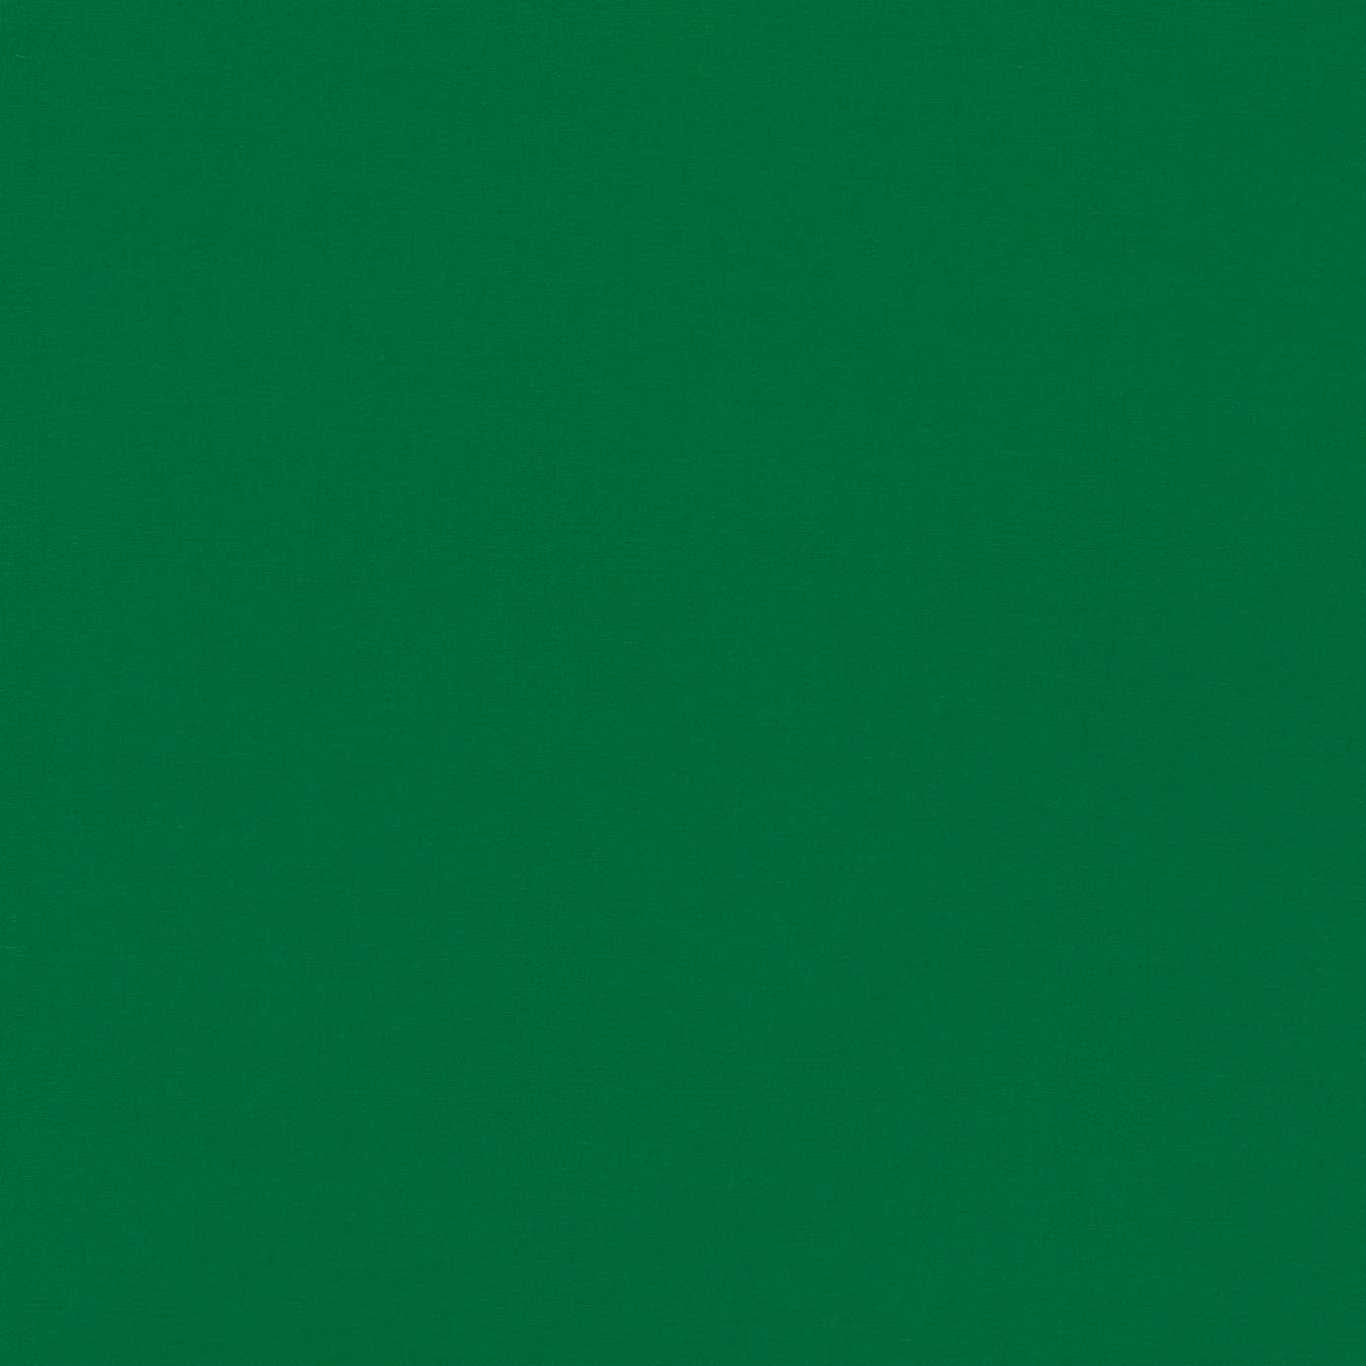 Empower Plain Fabric by Harlequin - HMOC133588 - Bottle Green